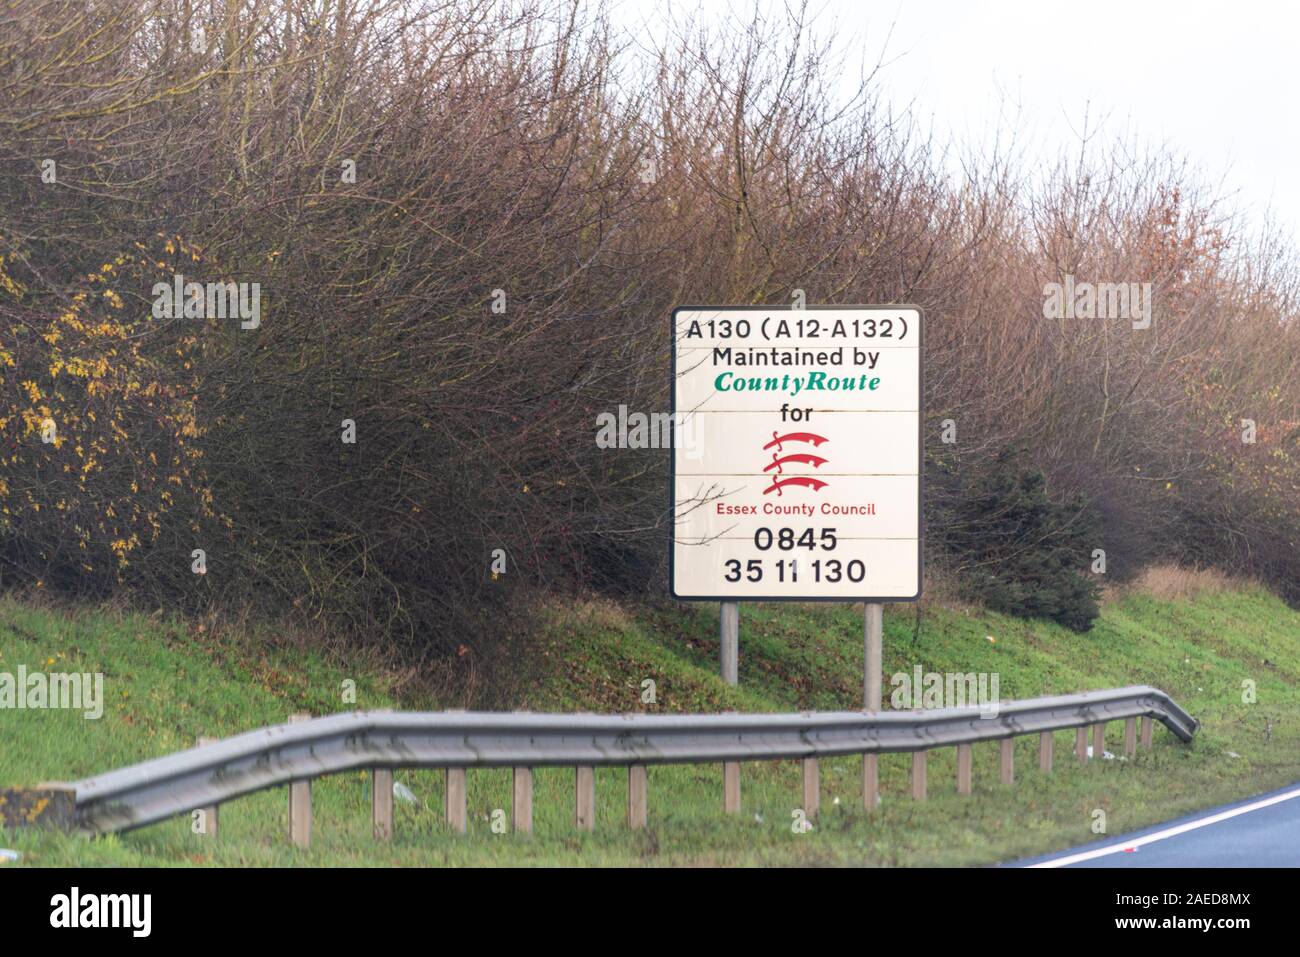 Sign on a stretch of A130 carriageway from A12 to A132 stating maintained by County Route for Essex County Council with phone number. Road network Stock Photo